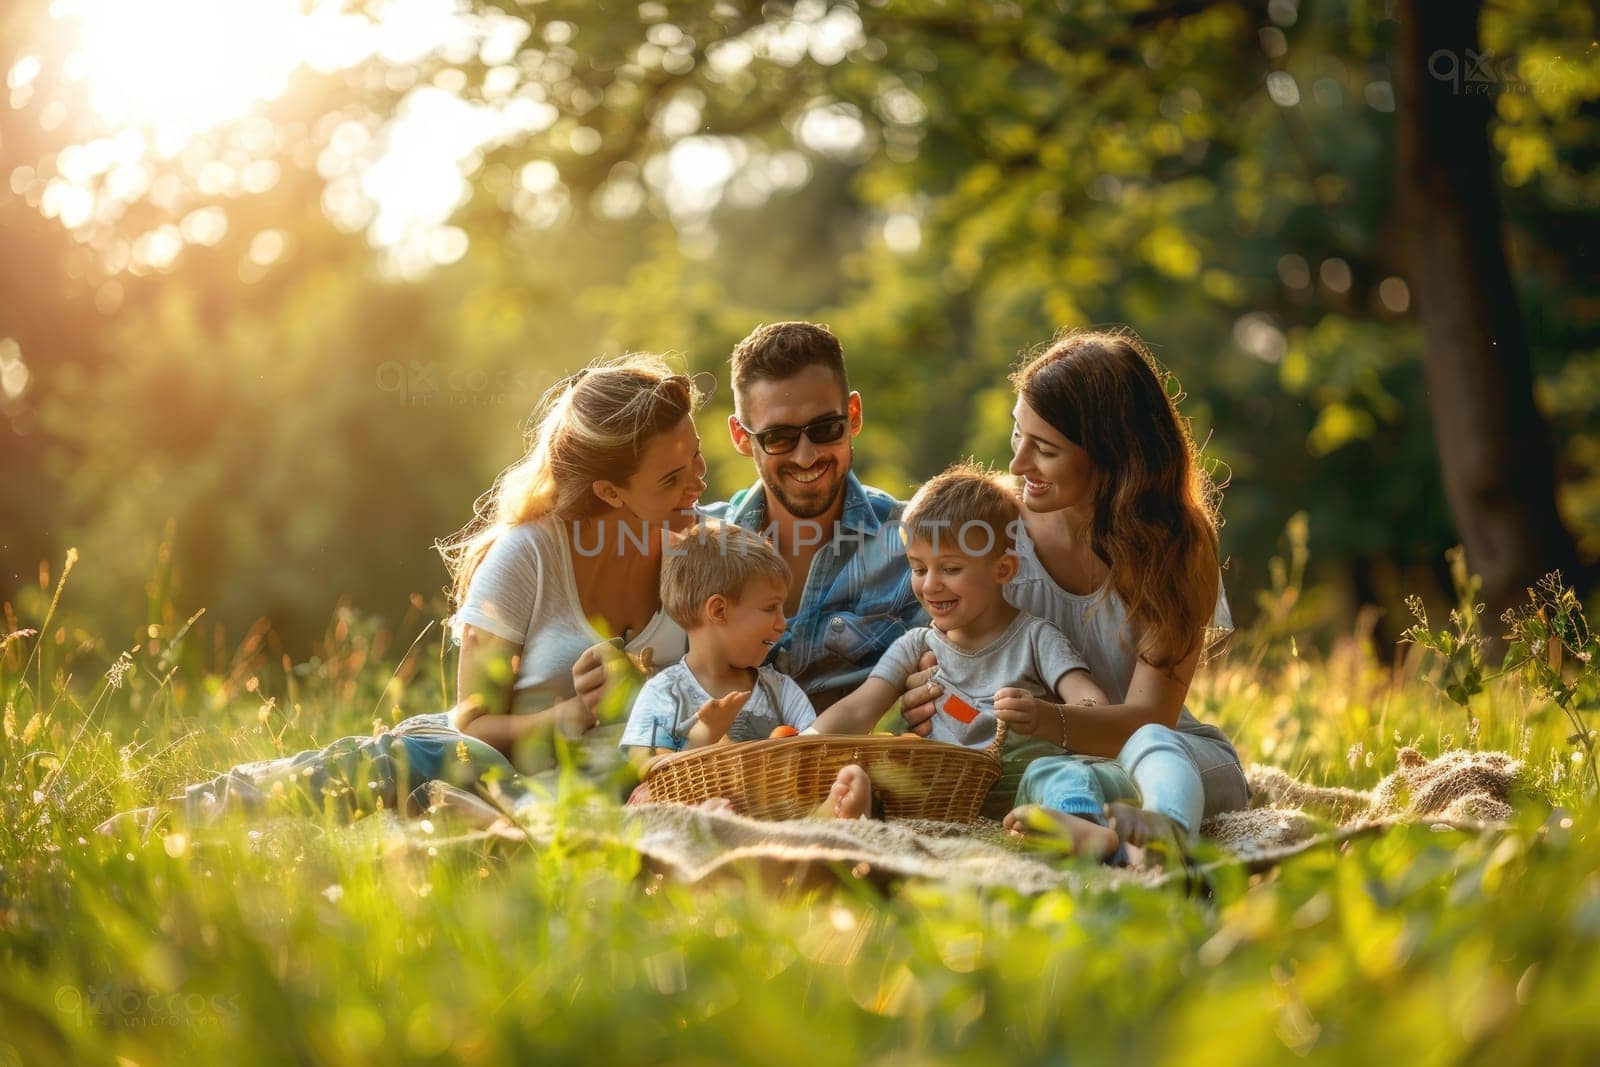 A happy family enjoying leisure time outdoors